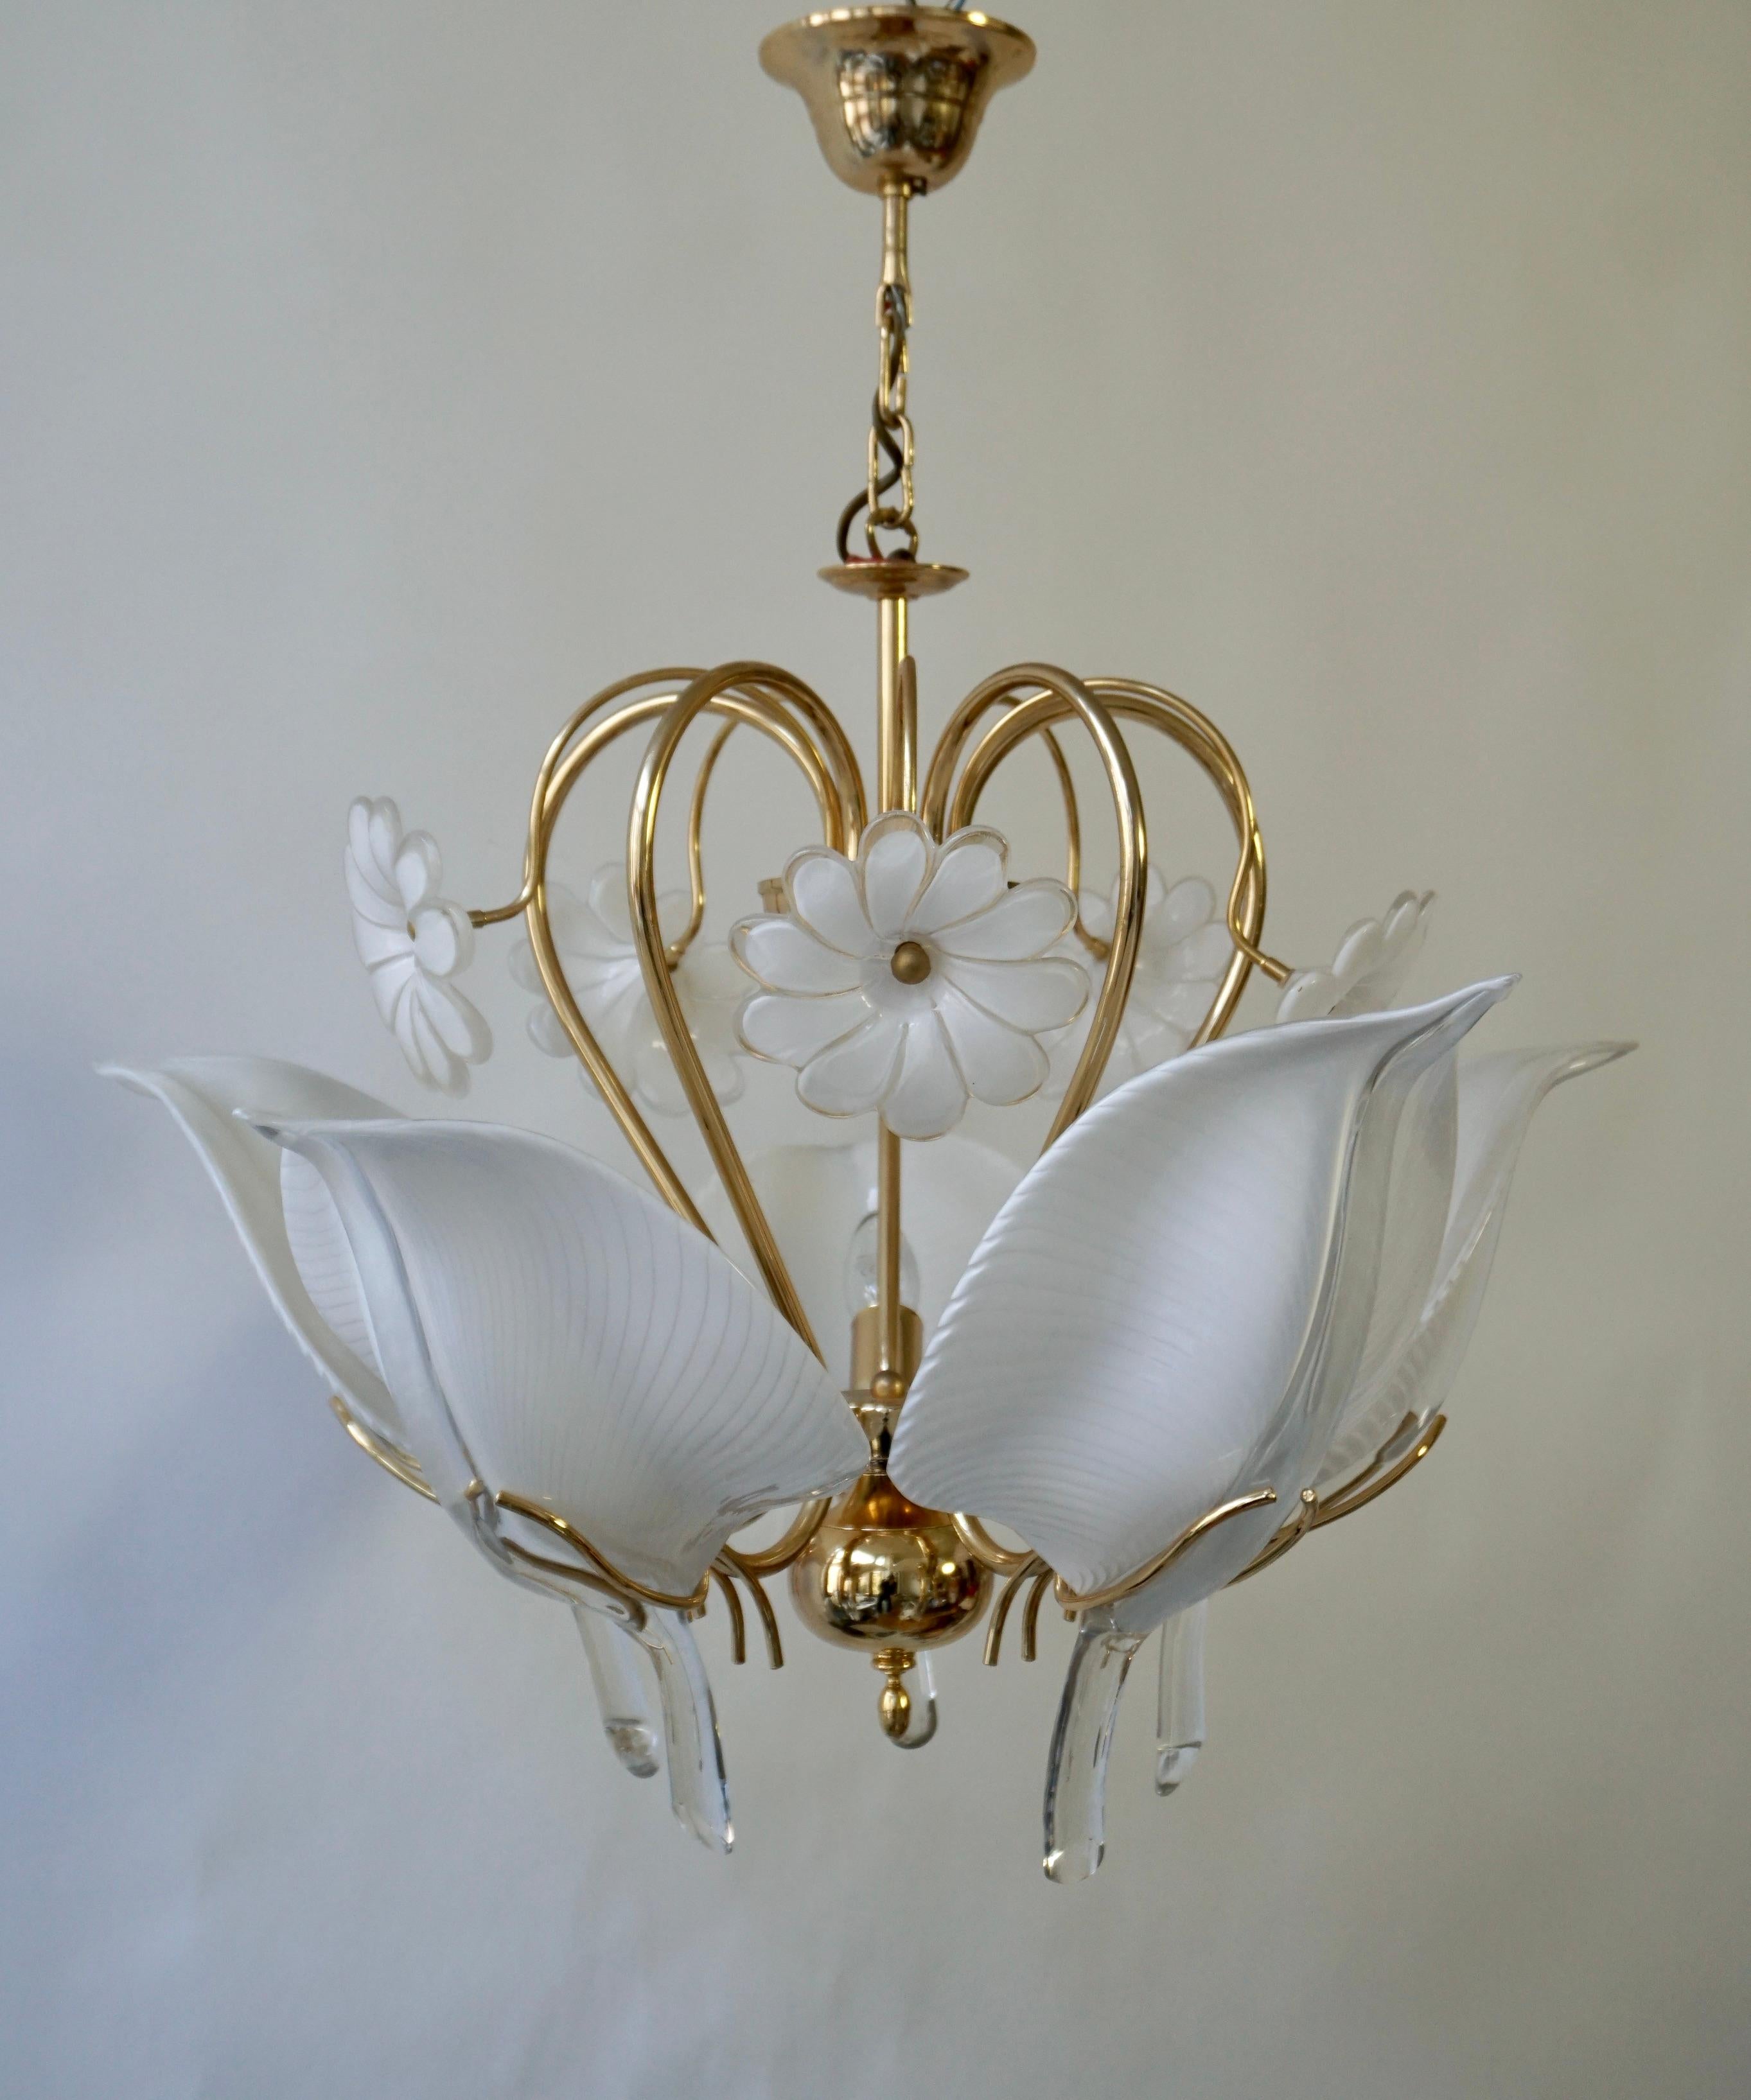 Amazing Mid-Century Modern Vintage Murano glass five light pendant chandelier. 
Design by Franco Luce for Seguso. 
Striking Italian design from the 1970s. 
Handcrafted forged metal frame with original gilt finish. The five original Murano leaves and